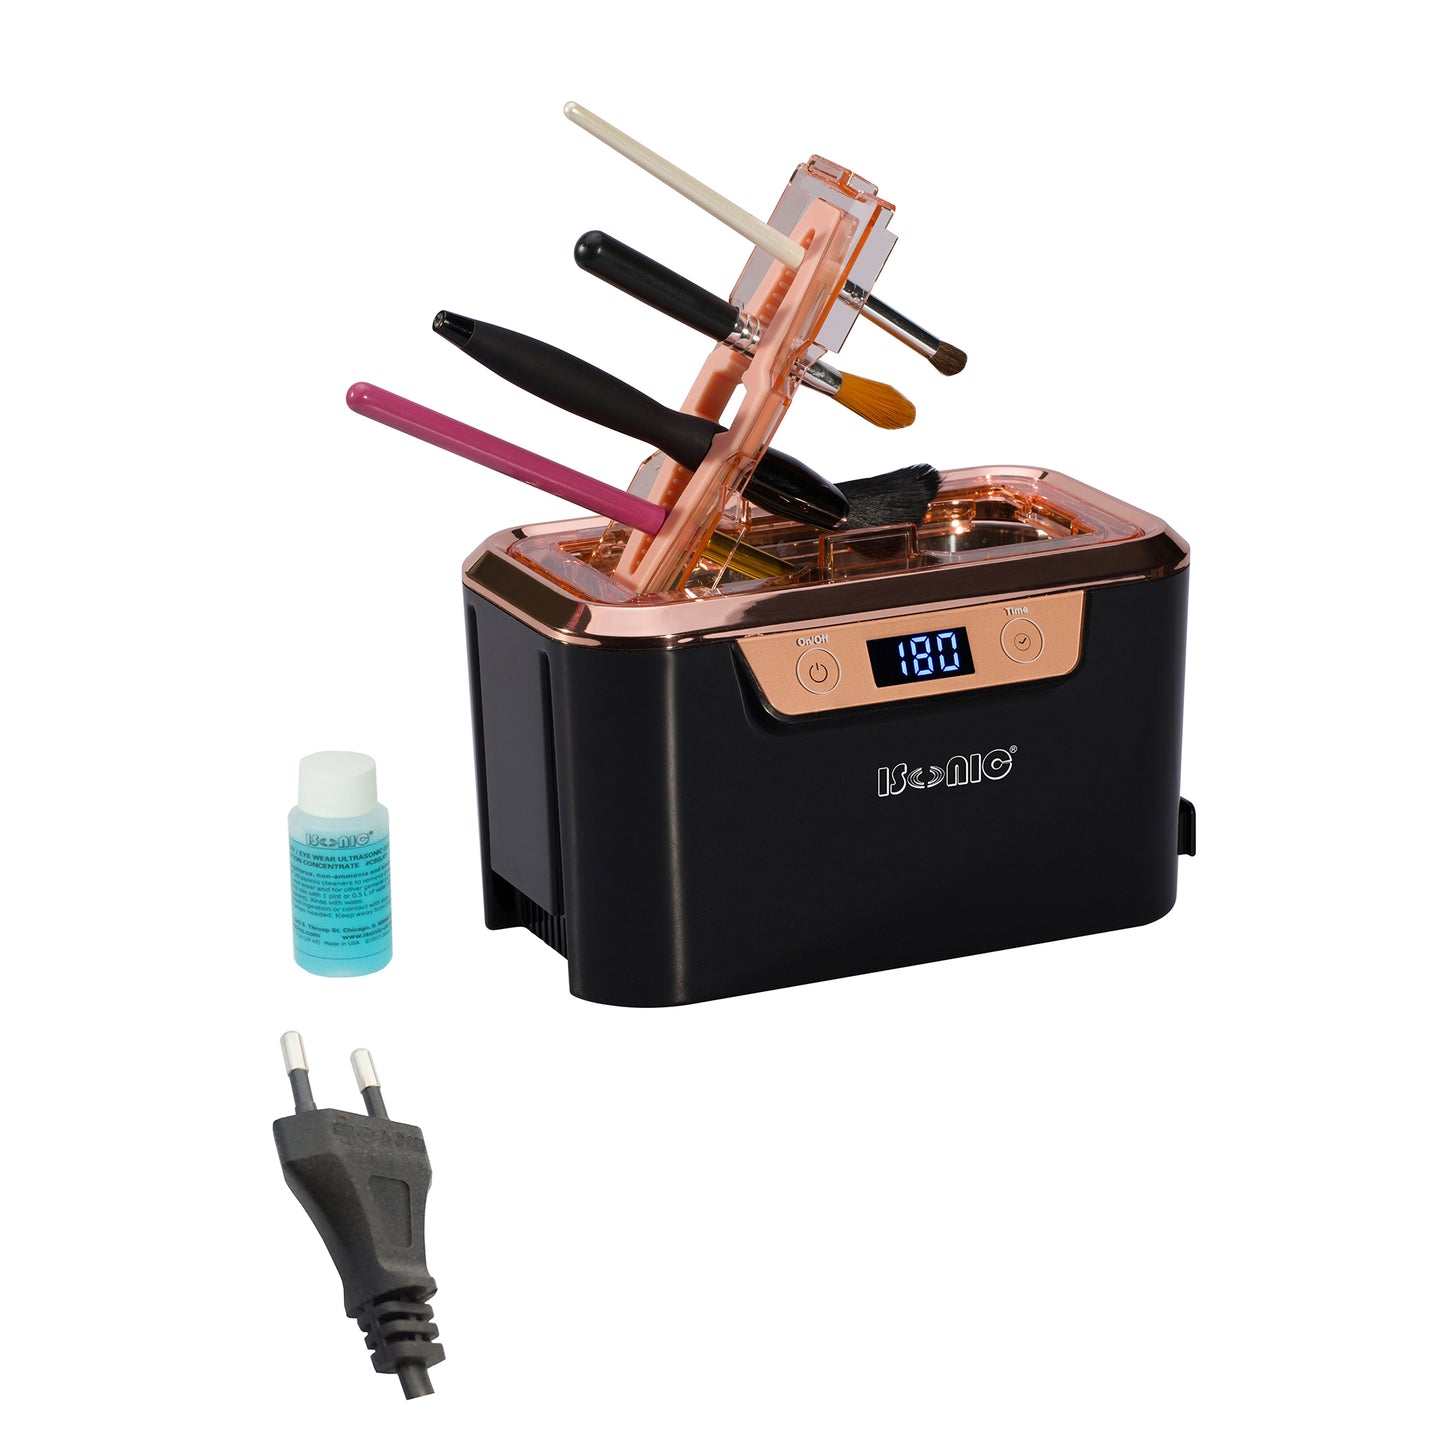 DS310C-BR | iSonic® Miniaturized Commercial Ultrasonic Cleaner with a makeup brush holder, black and rose gold colors. Promotional Price!